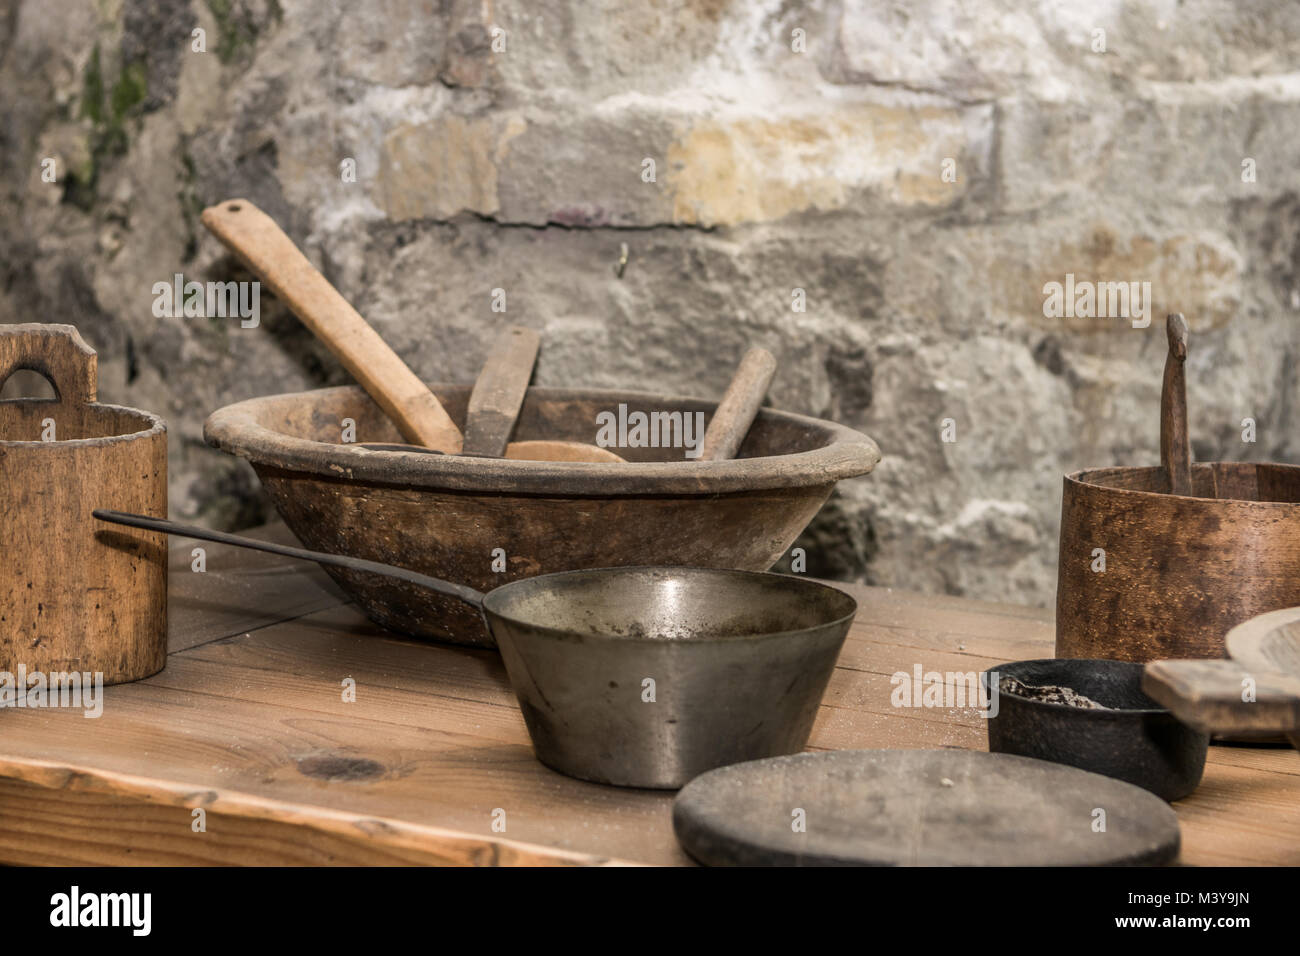 Medieval kitchen with tools, baskets, scale, fireplace Stock Photo